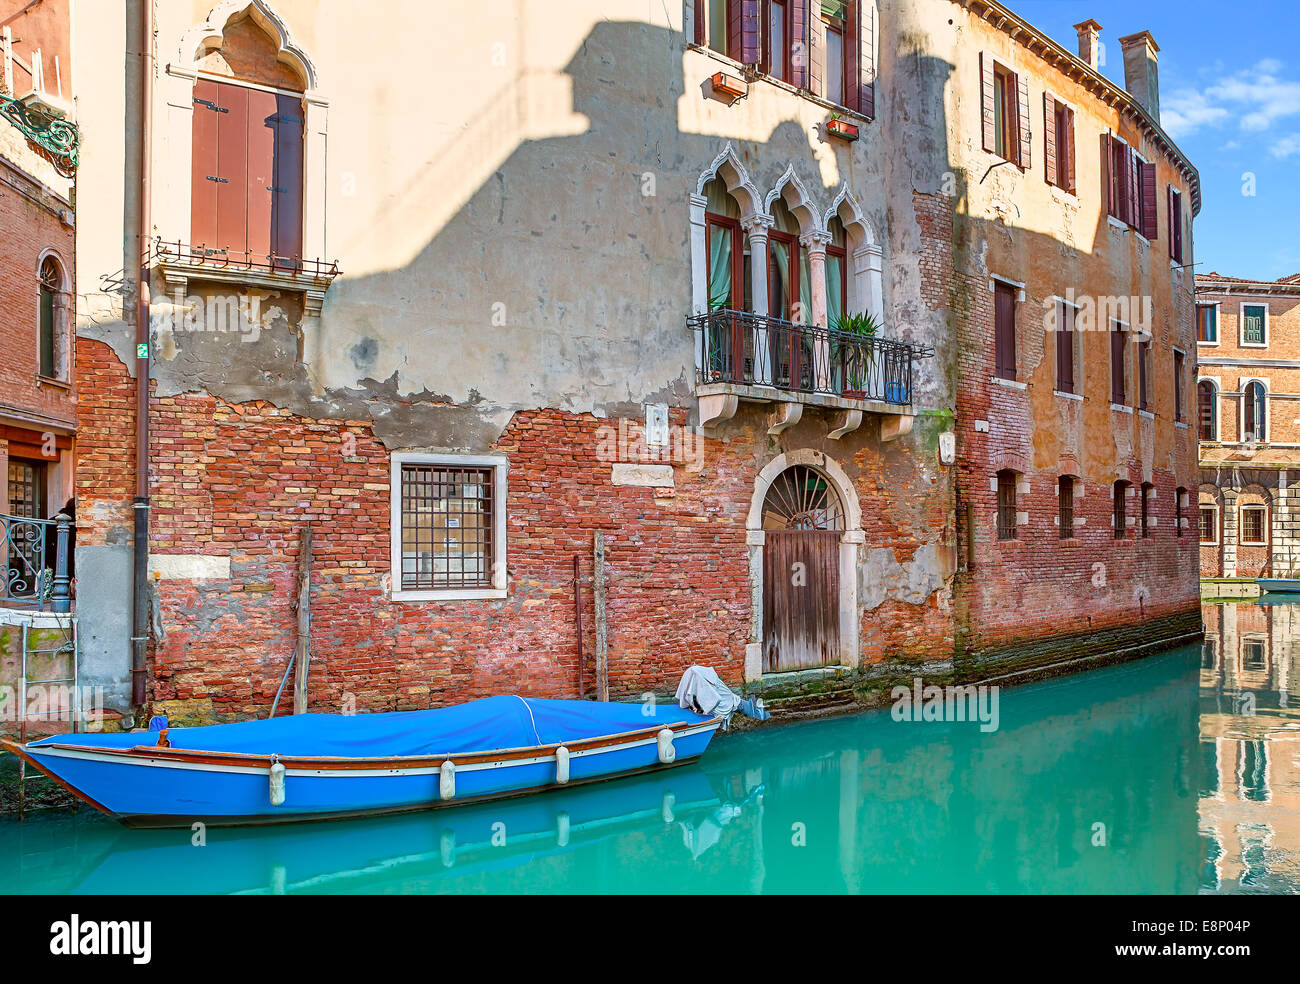 Boat on narrow canal among old brick houses in Venice, Italy. Stock Photo